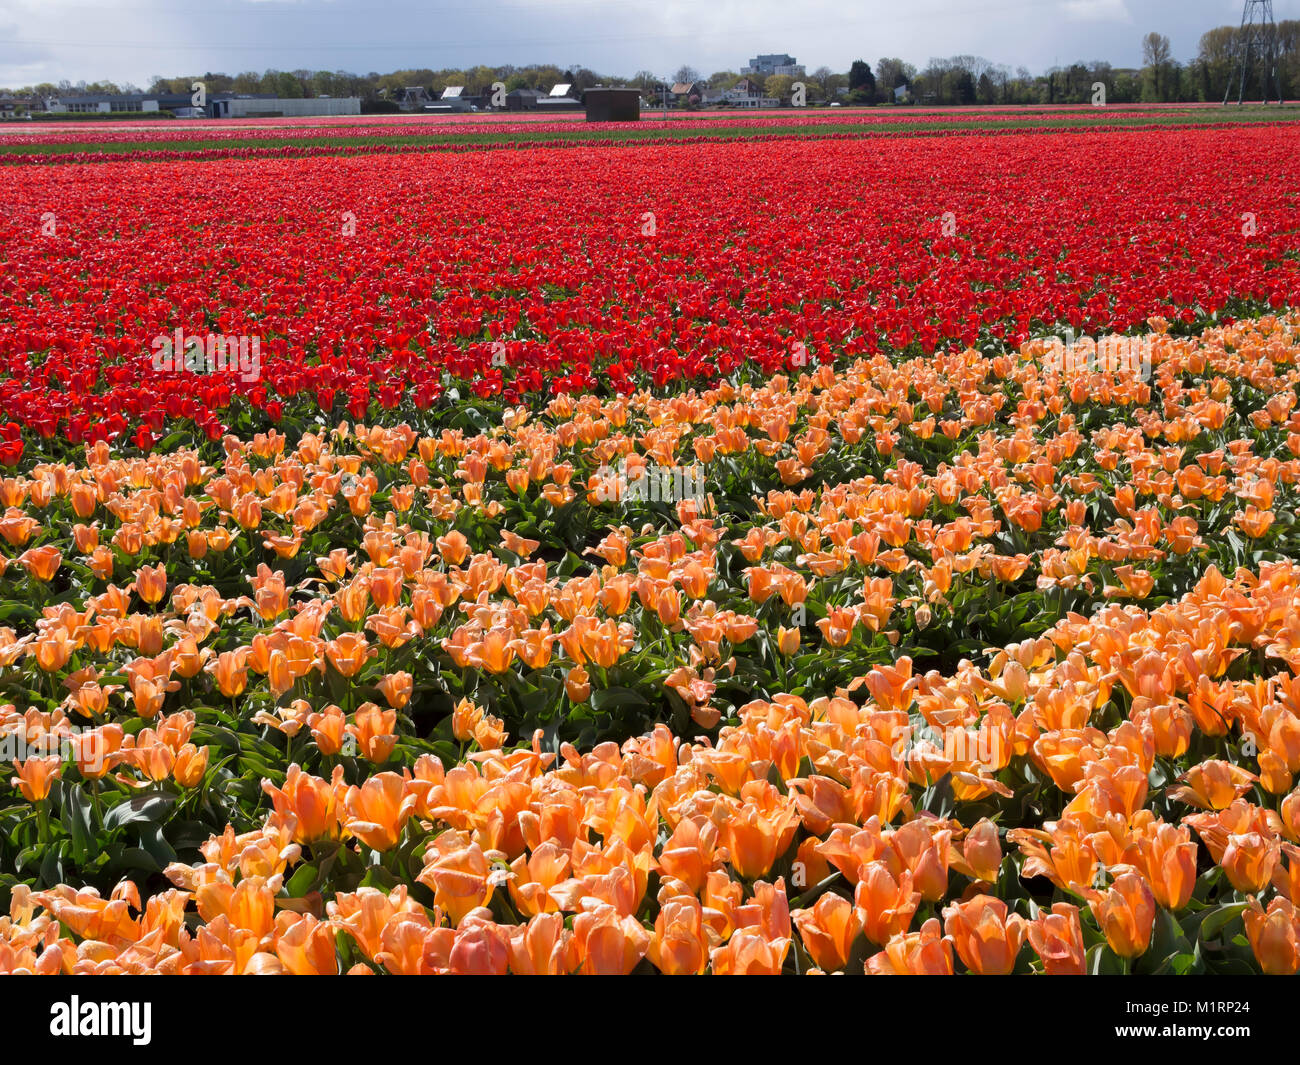 Production of tulips at a bulb farm in Holland, Netherlands Stock Photo